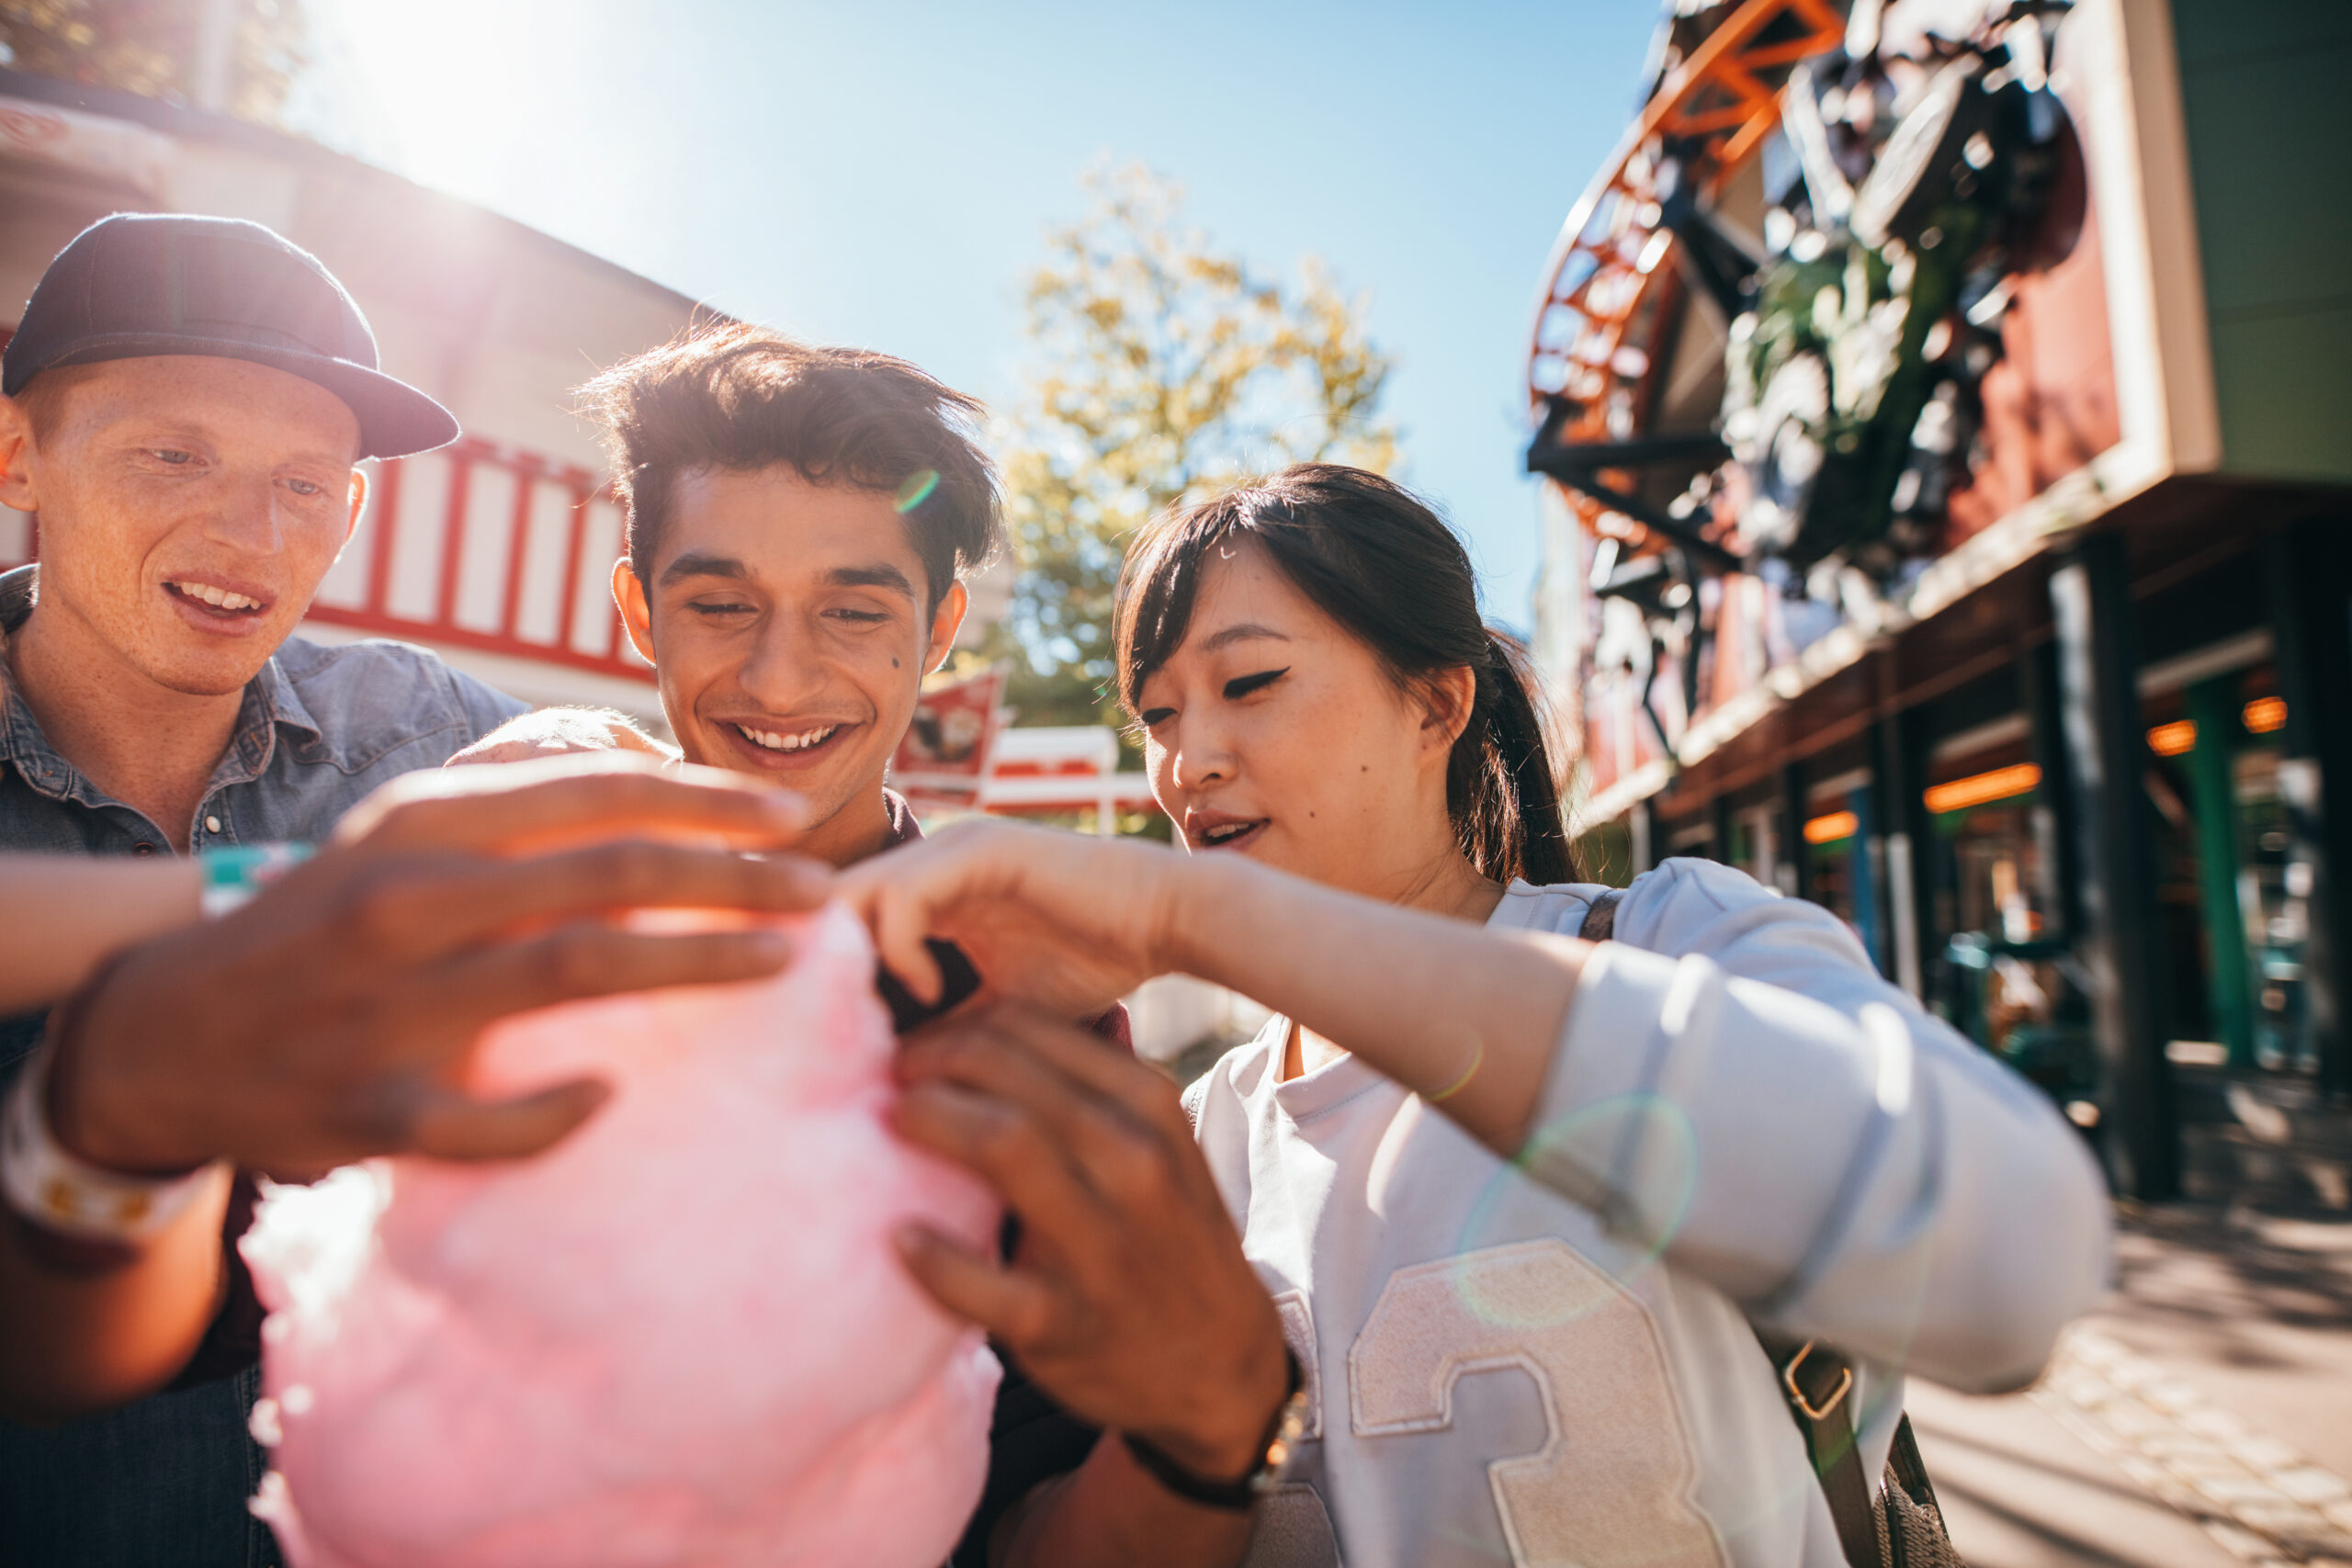 Young men and woman sharing cotton candy floss at fairground. Group of friends eating cotton candy in amusement park.